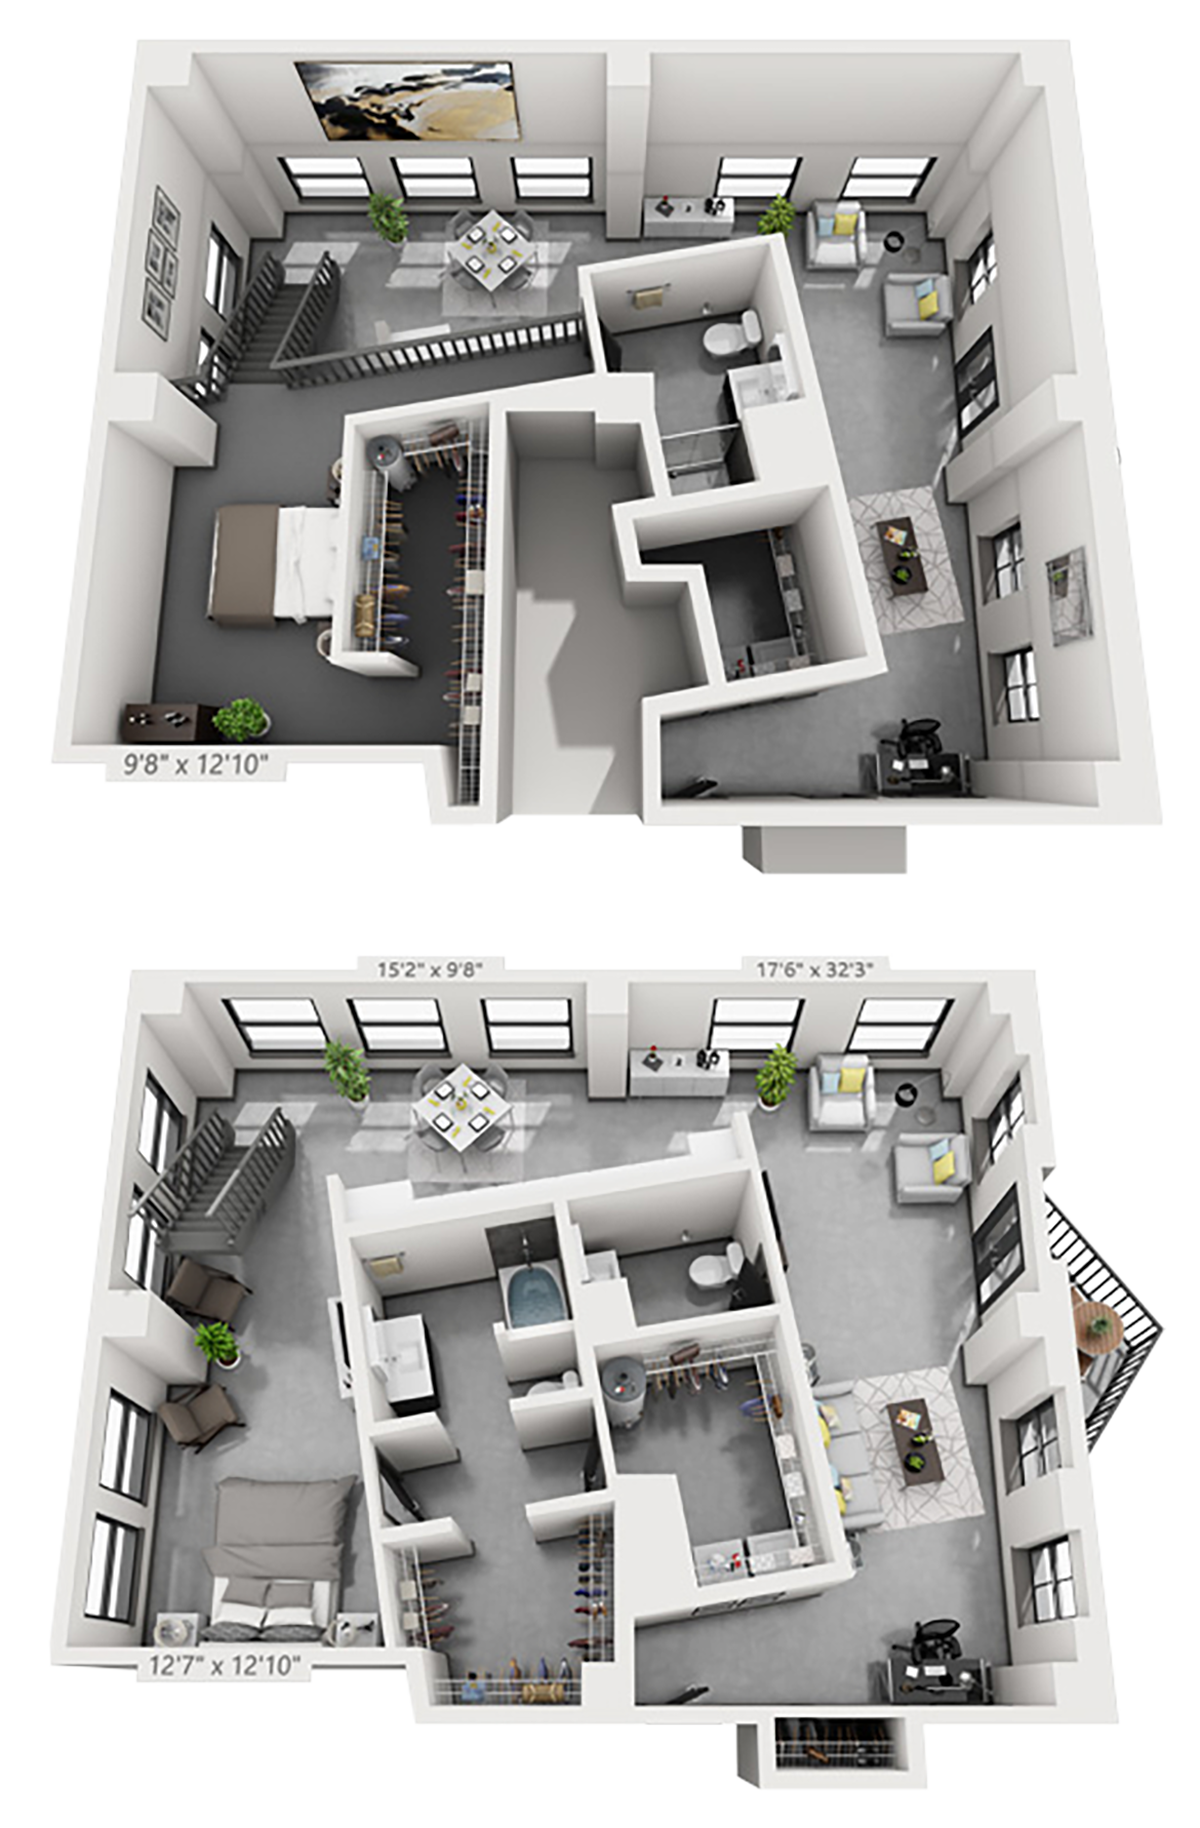 PH-B2M plan is 2 bed, 2.5 bath and 1,762 square feet